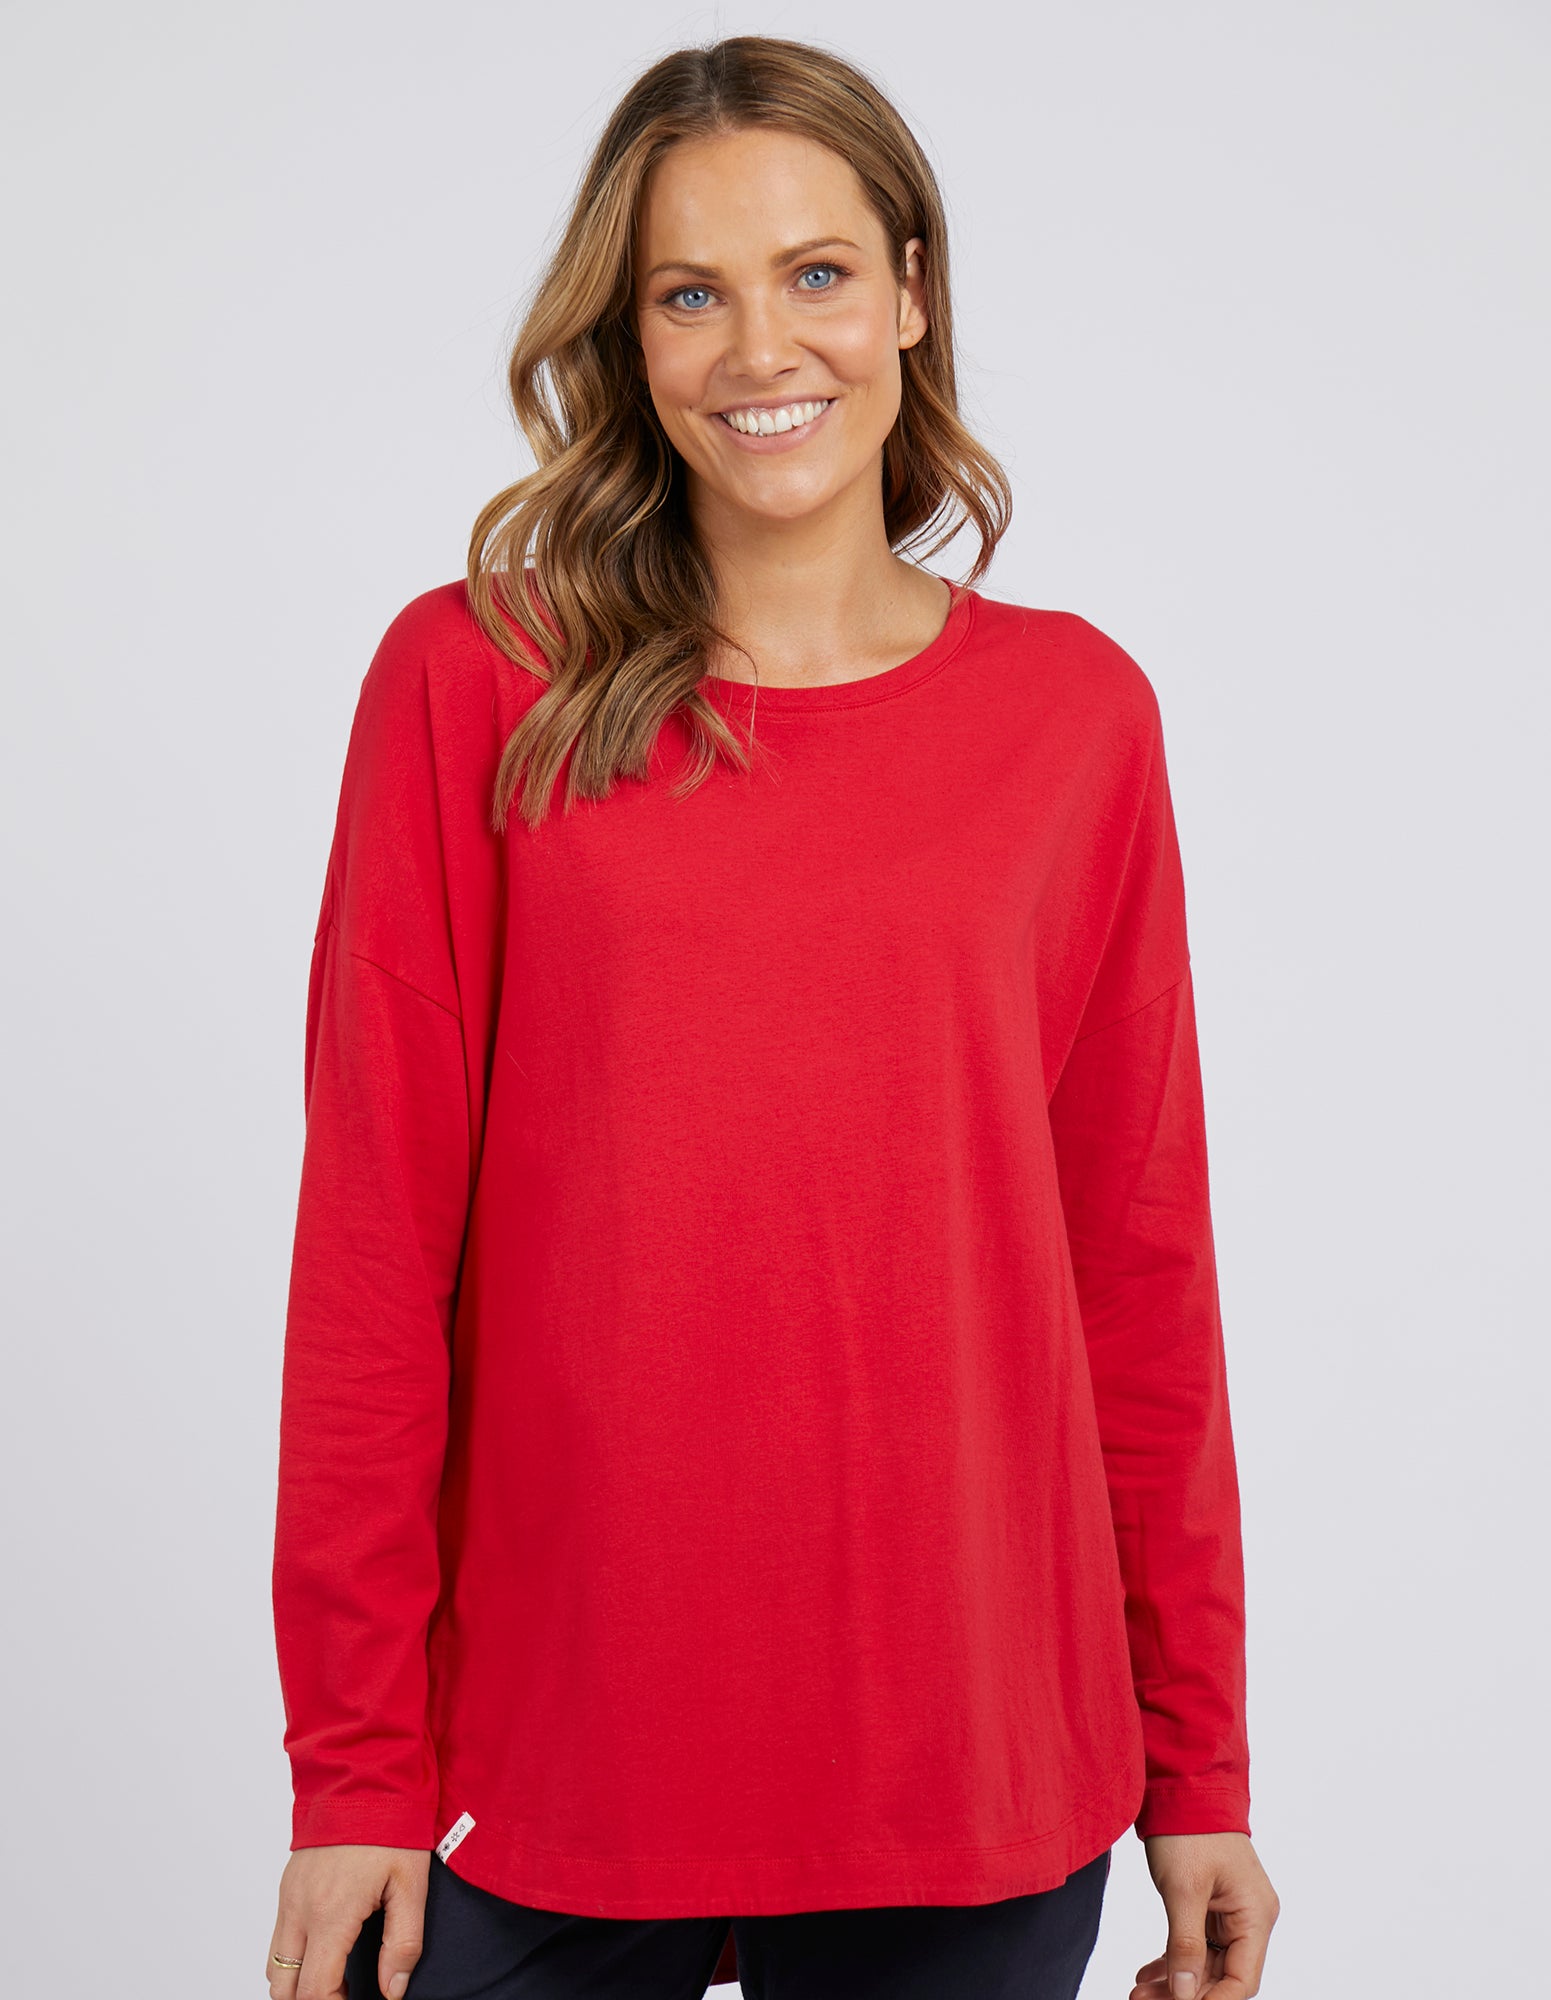 Society L/S Tee - Scarlet - Elm Lifestyle - FUDGE Gifts Home Lifestyle